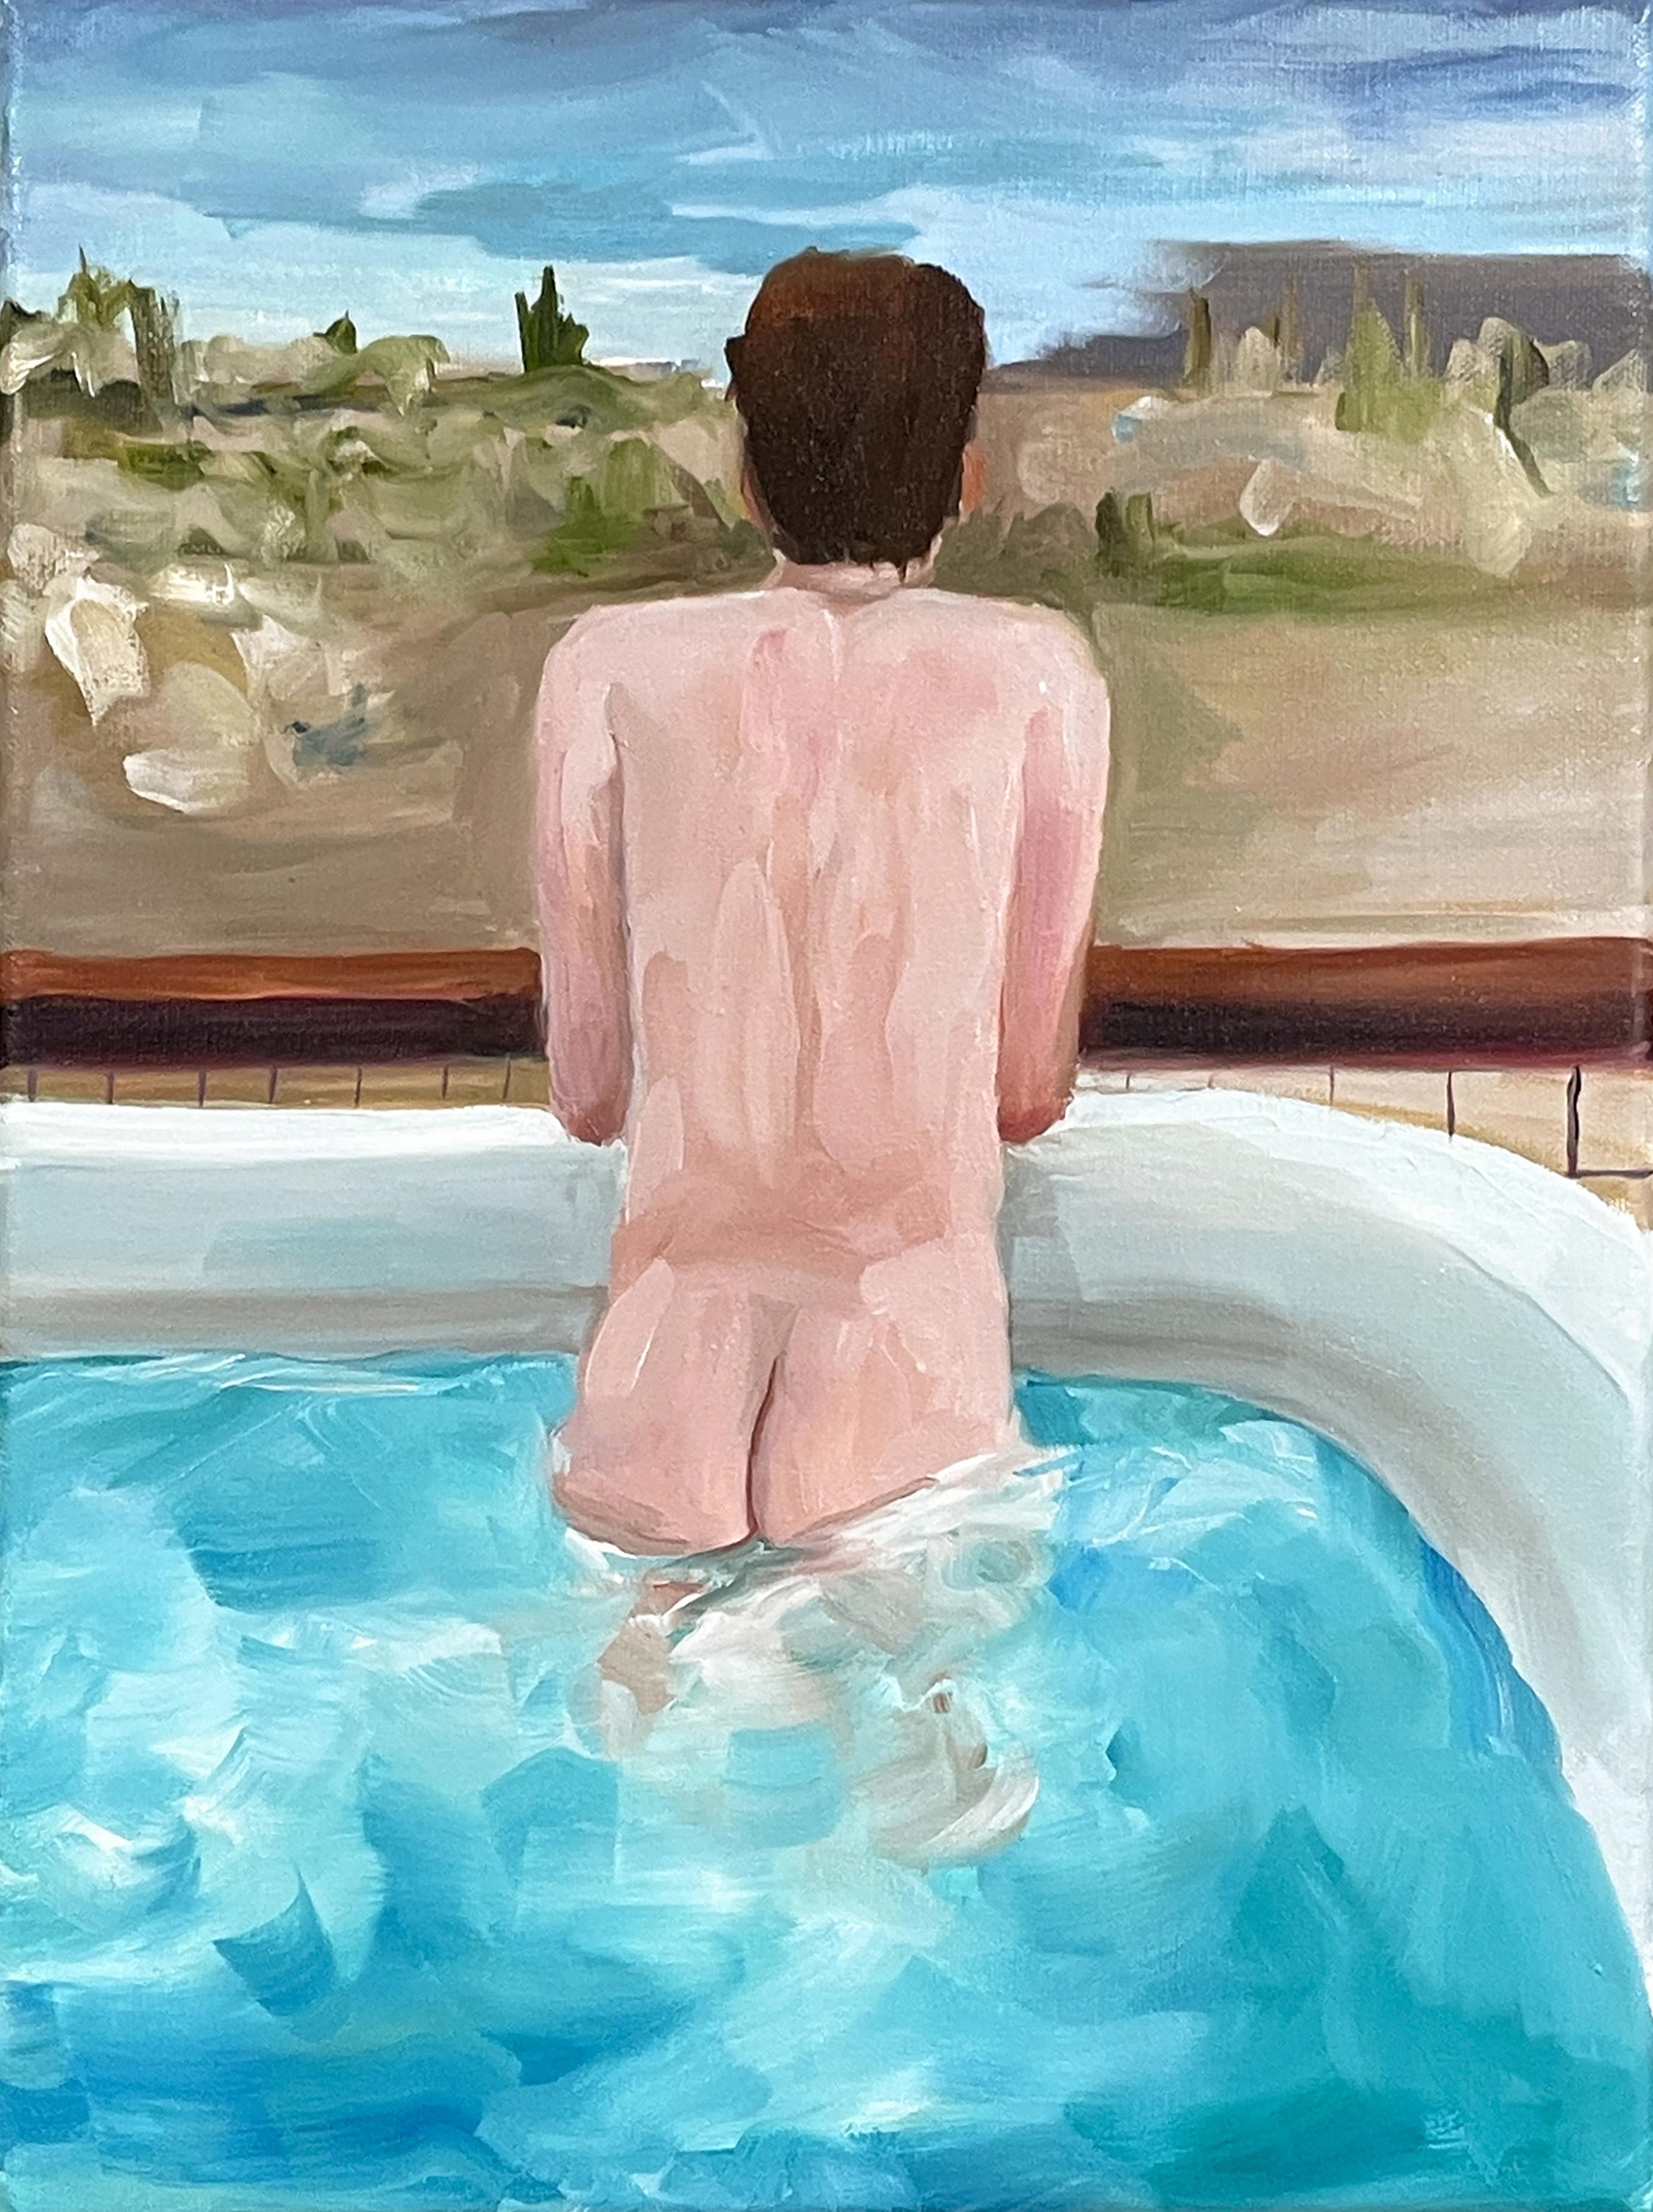 Kory Alexander Figurative Painting - “Hot Tub During a Cold Dawn”- oil on linen, framed